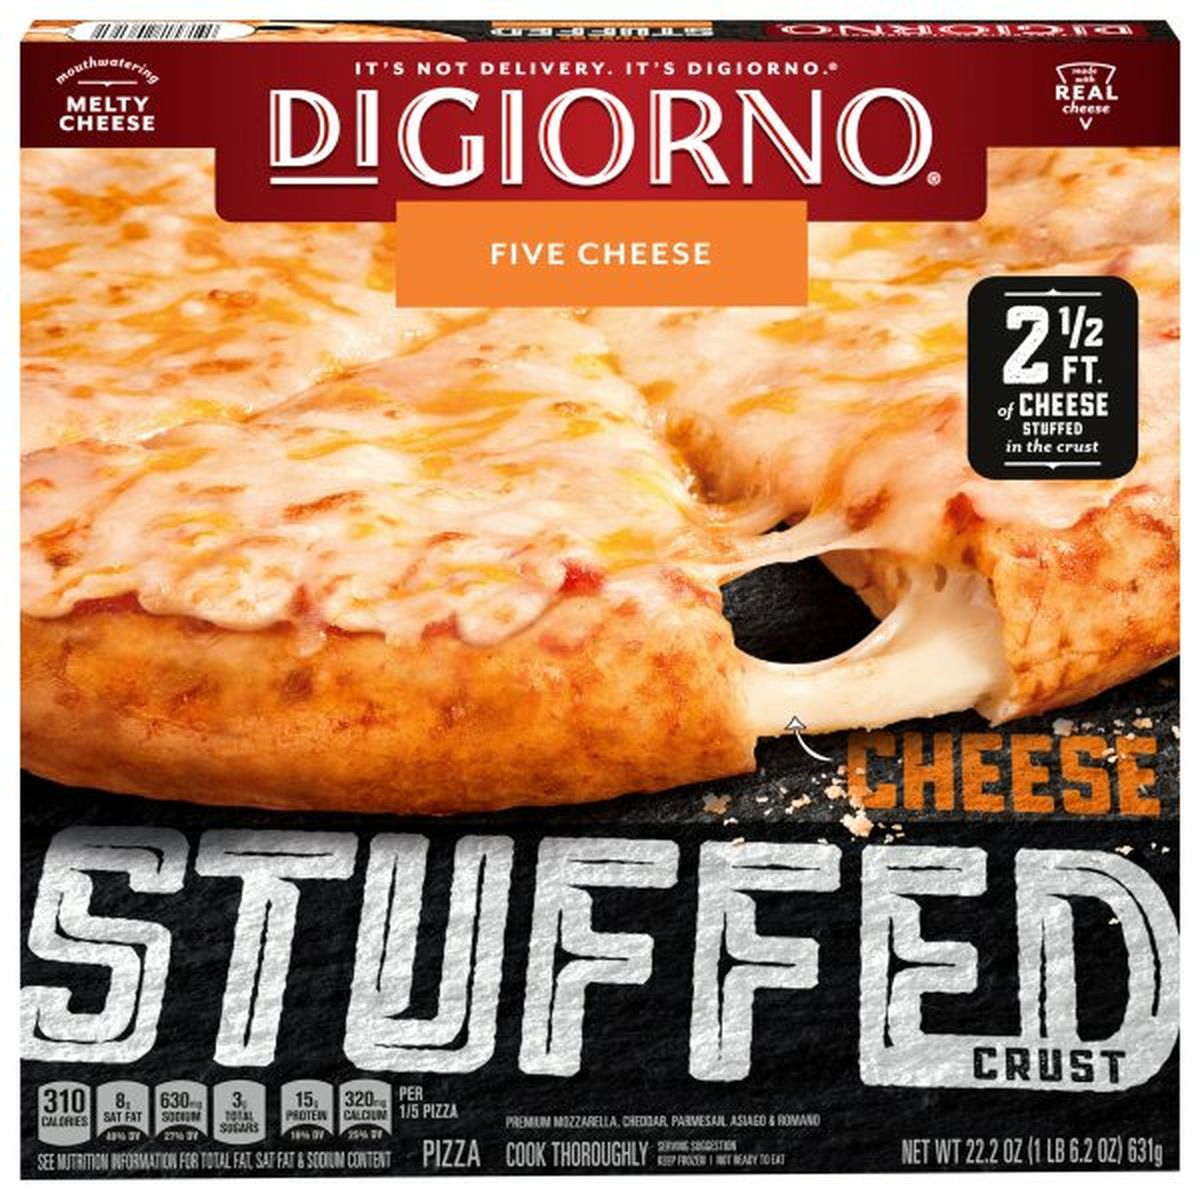 Calories in DiGiorno Pizza, Five Cheese, Cheese Stuffed Crust